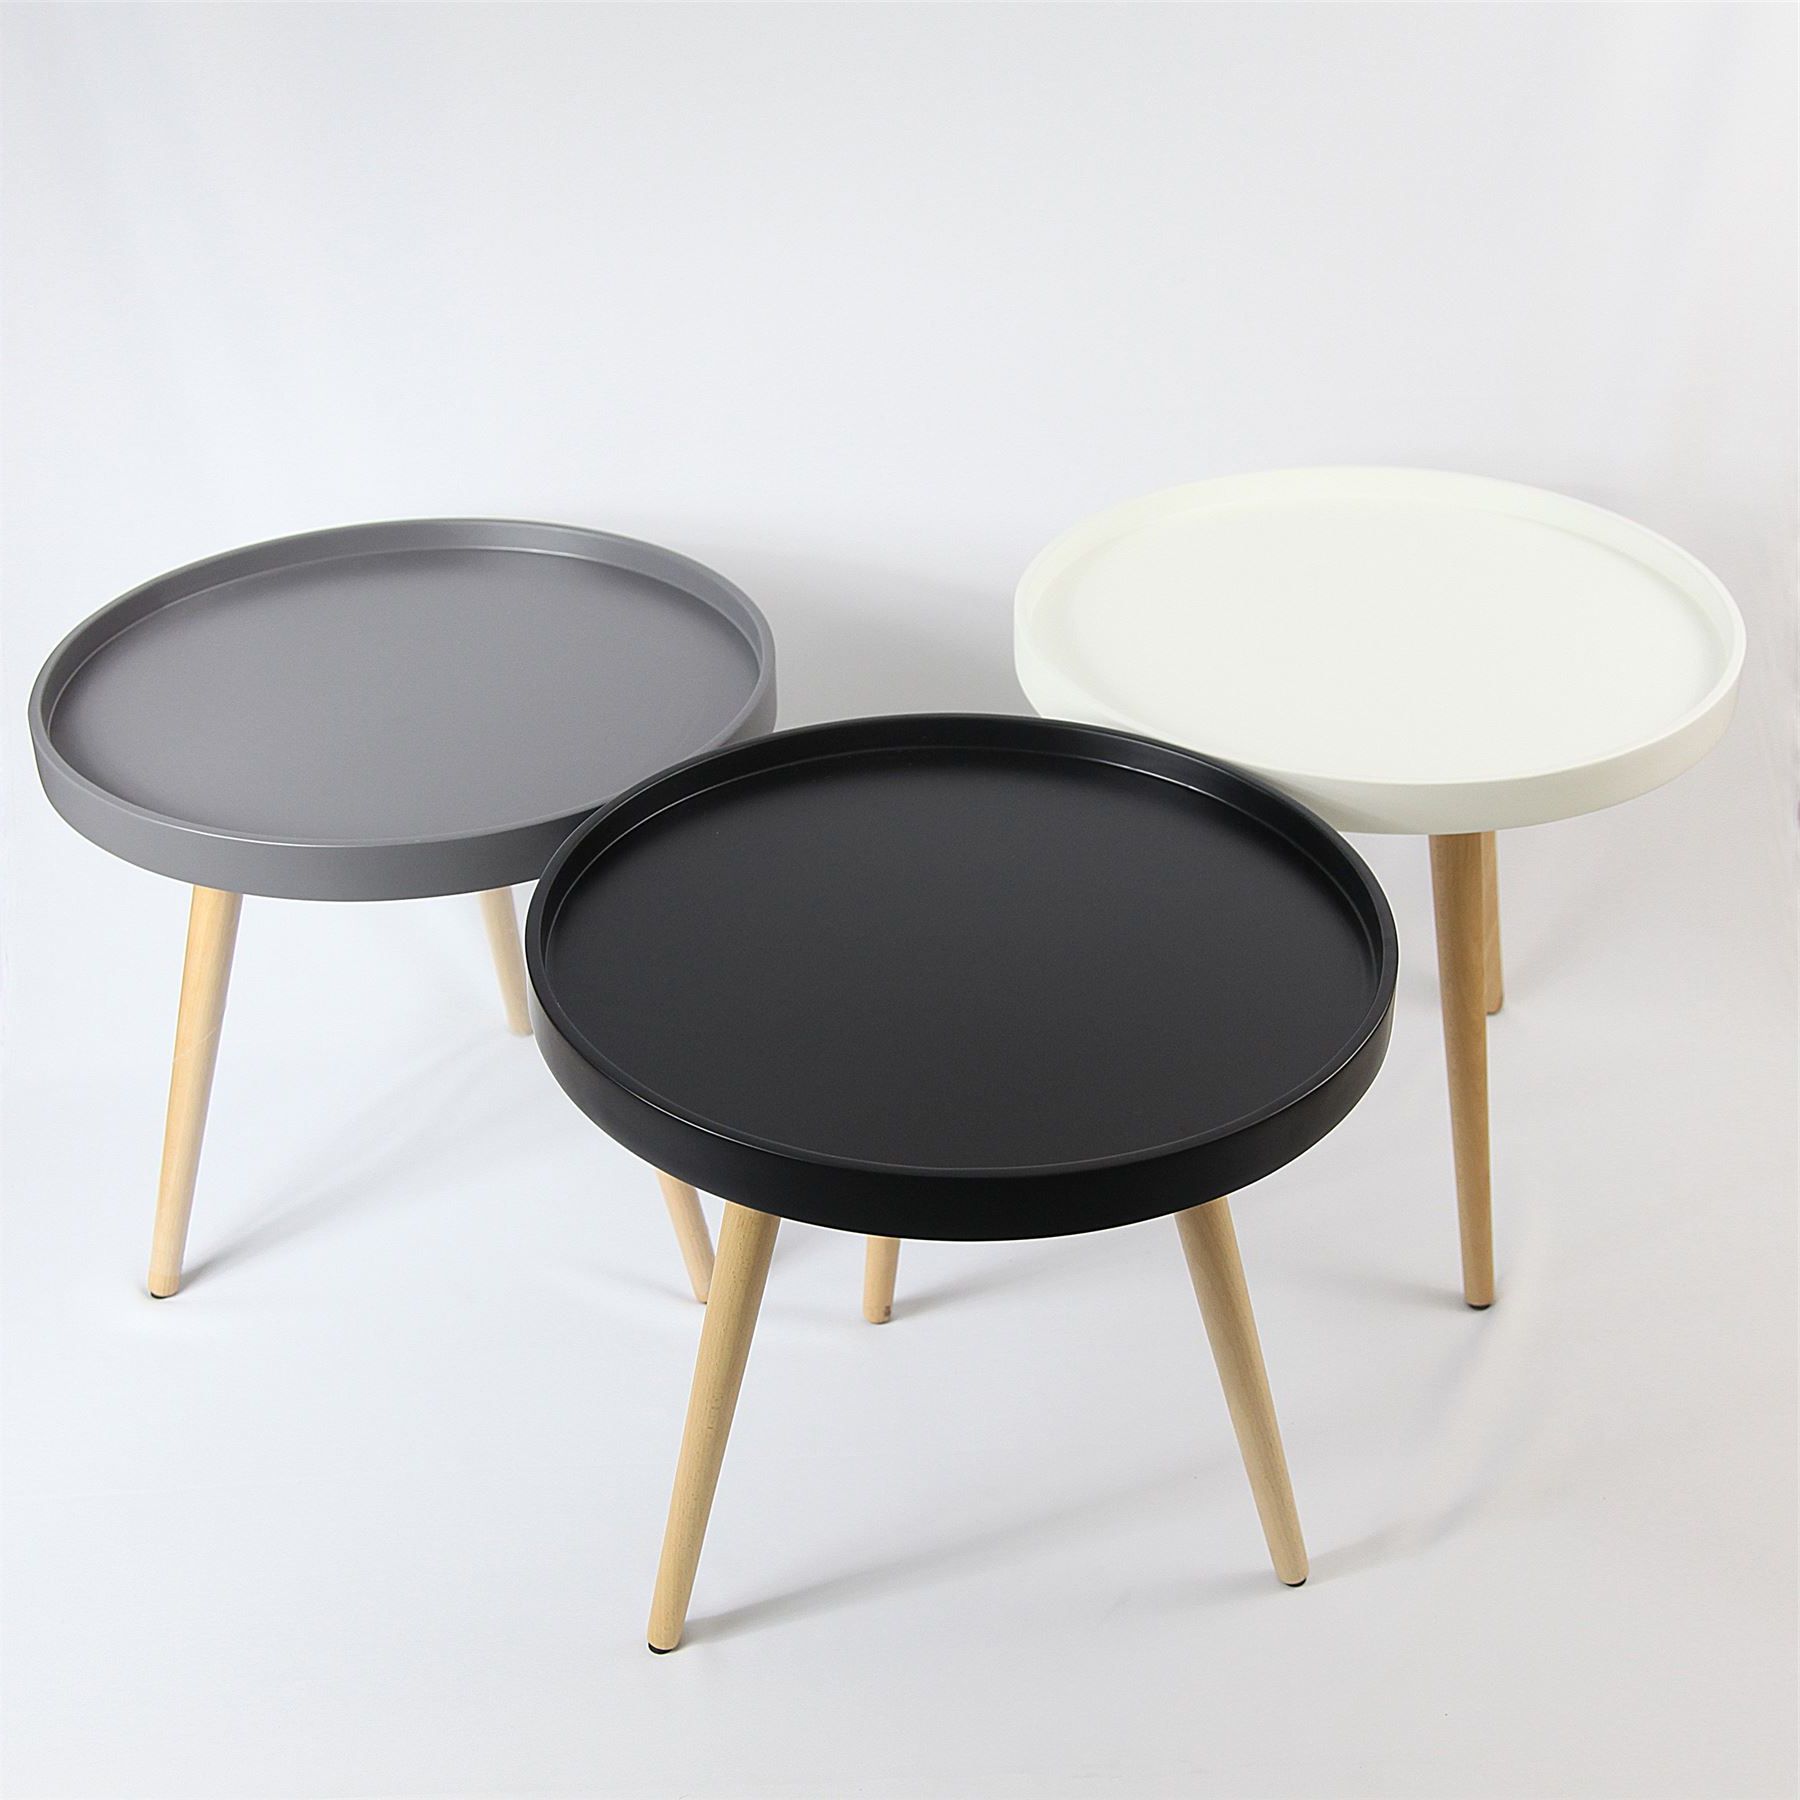 2019 Capri Round Tray Table Coffee Table Solid Wood In 50cm (View 11 of 20)